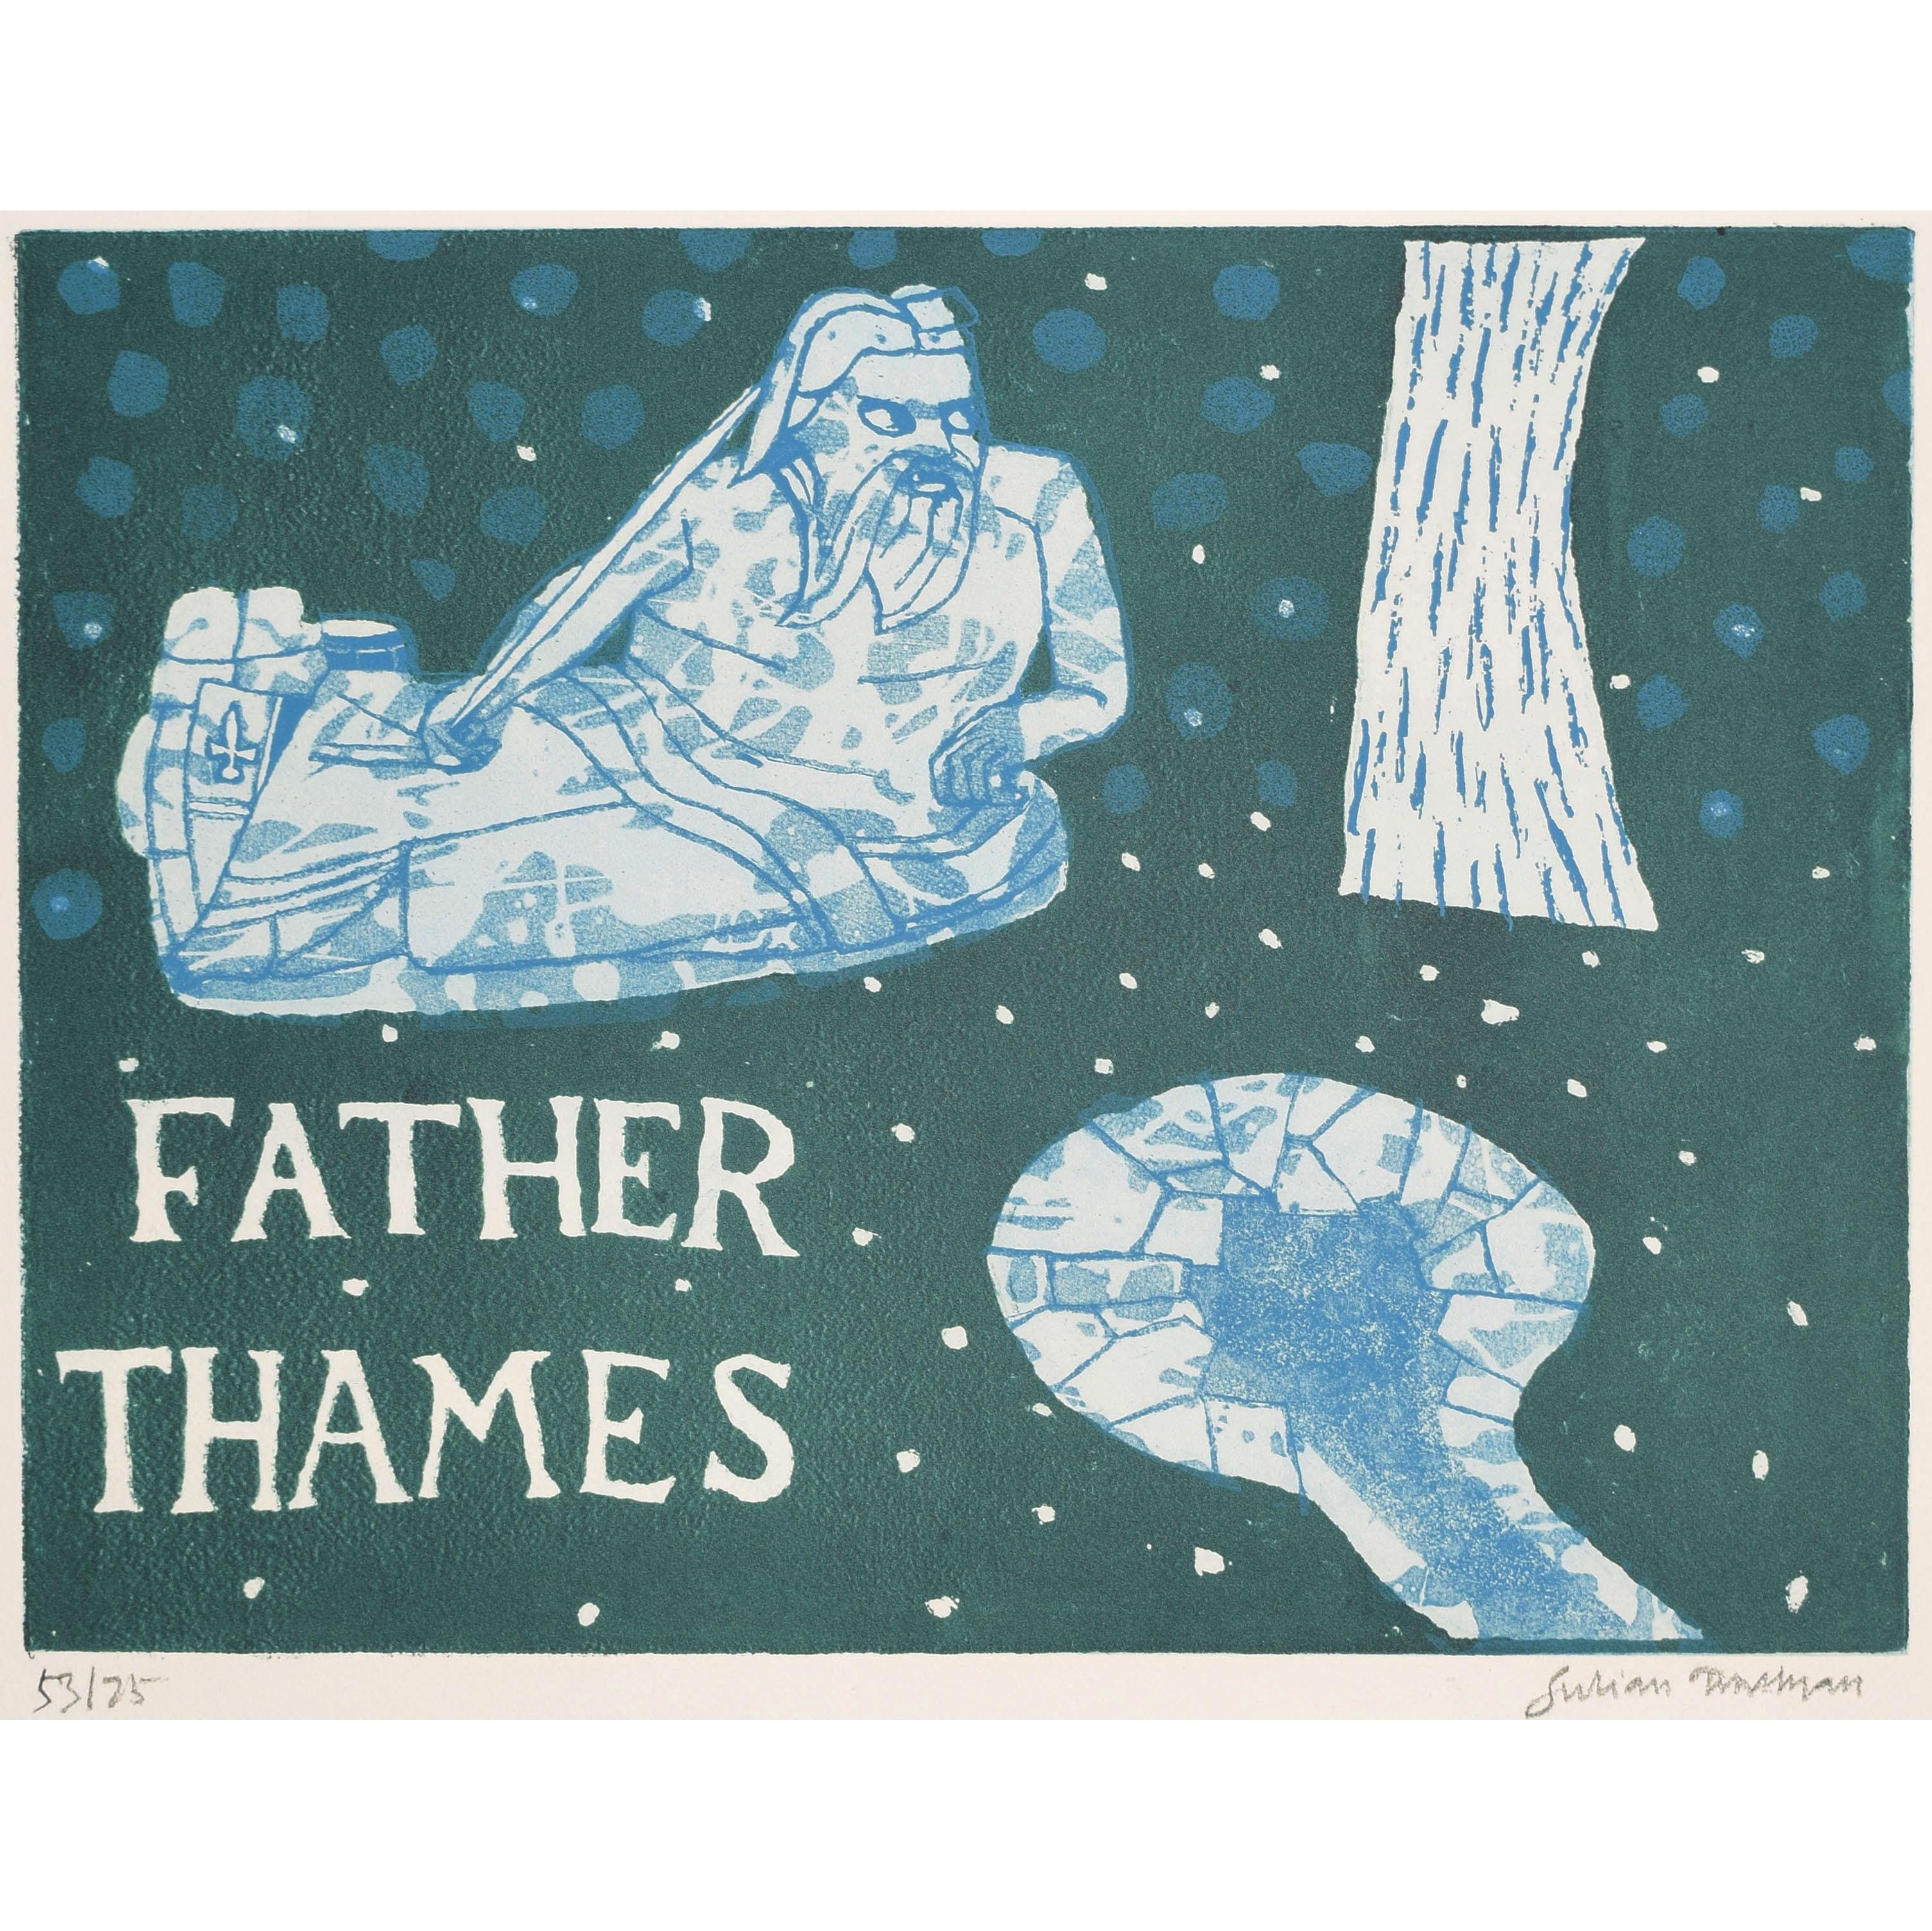 Julian Trevelyan (1910-1988)
Father Thames (1969)
Etching and aquatint, signed, numbered 53/75
35x48cm

Nephew of the historian G M Trevelyan he was educated at Bedales and Trinity College, Cambridge, reading English. Moving to Paris and becoming an